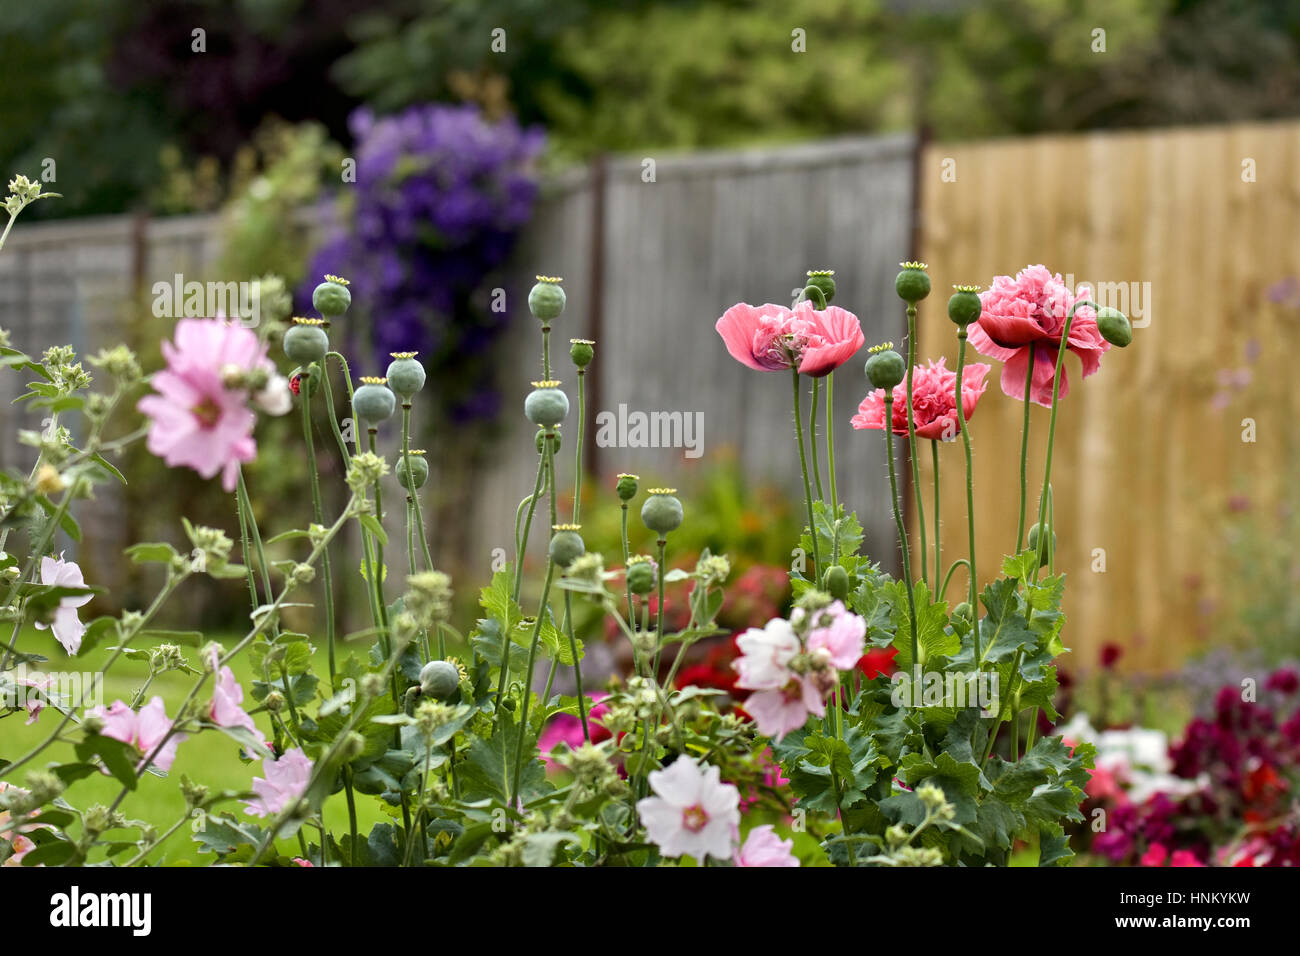 Double headed poppies and lavatera flowers in garden Stock Photo - Alamy